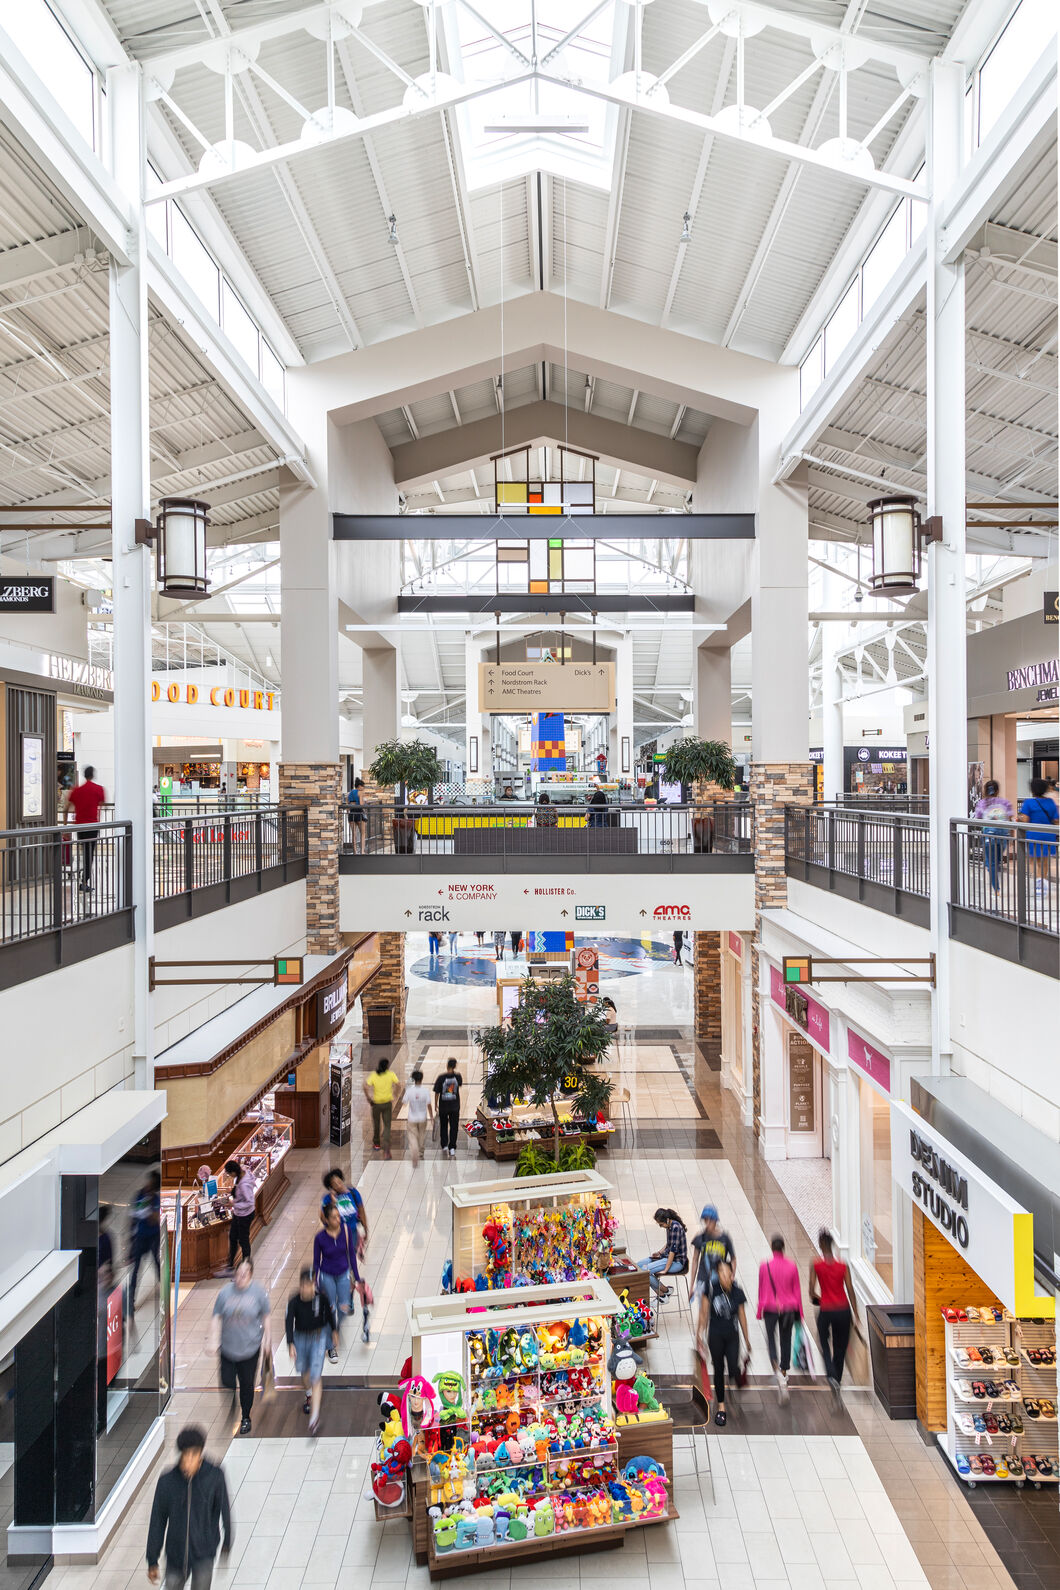 Interior of the shopping center The Parks Mall at Arlington